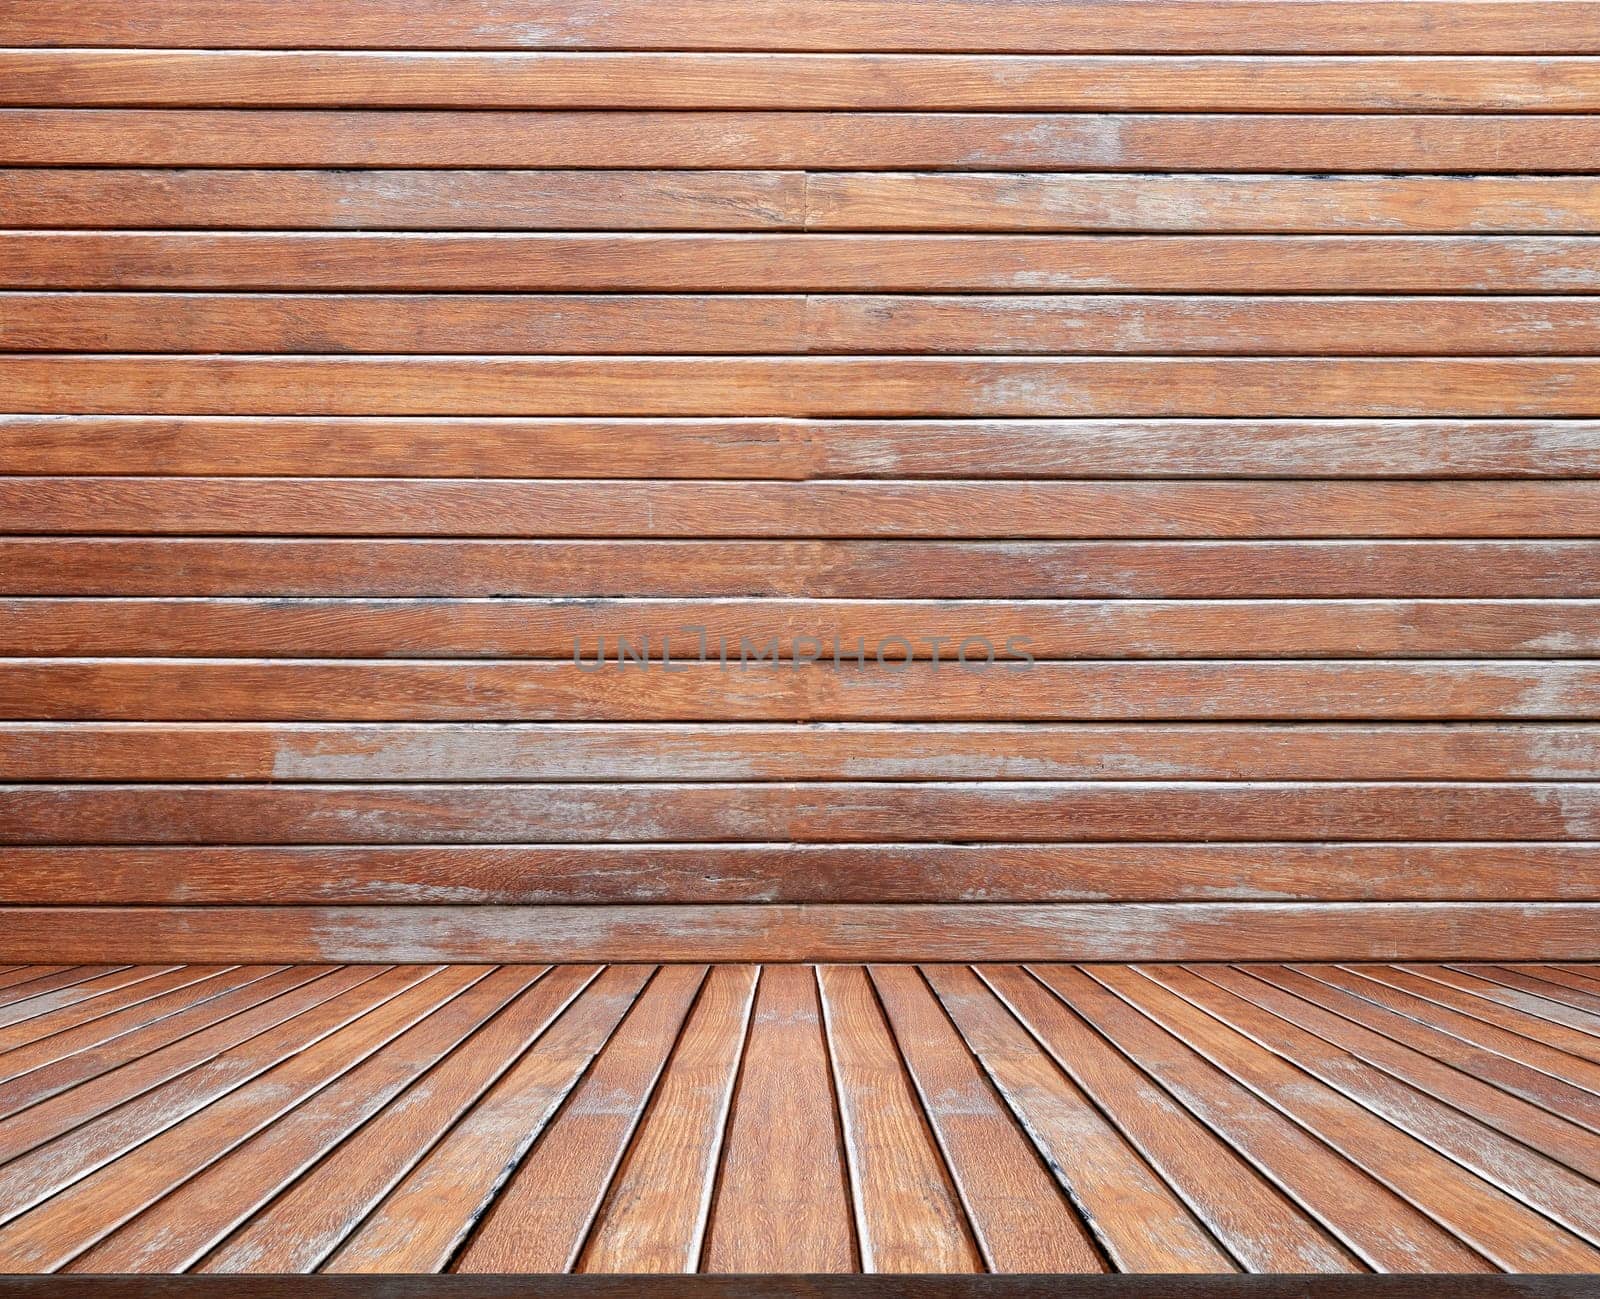 The Blank space interior wooden horizontal lines background behind wood floor. Wood texture blank space for mock up contents. by Gamjai